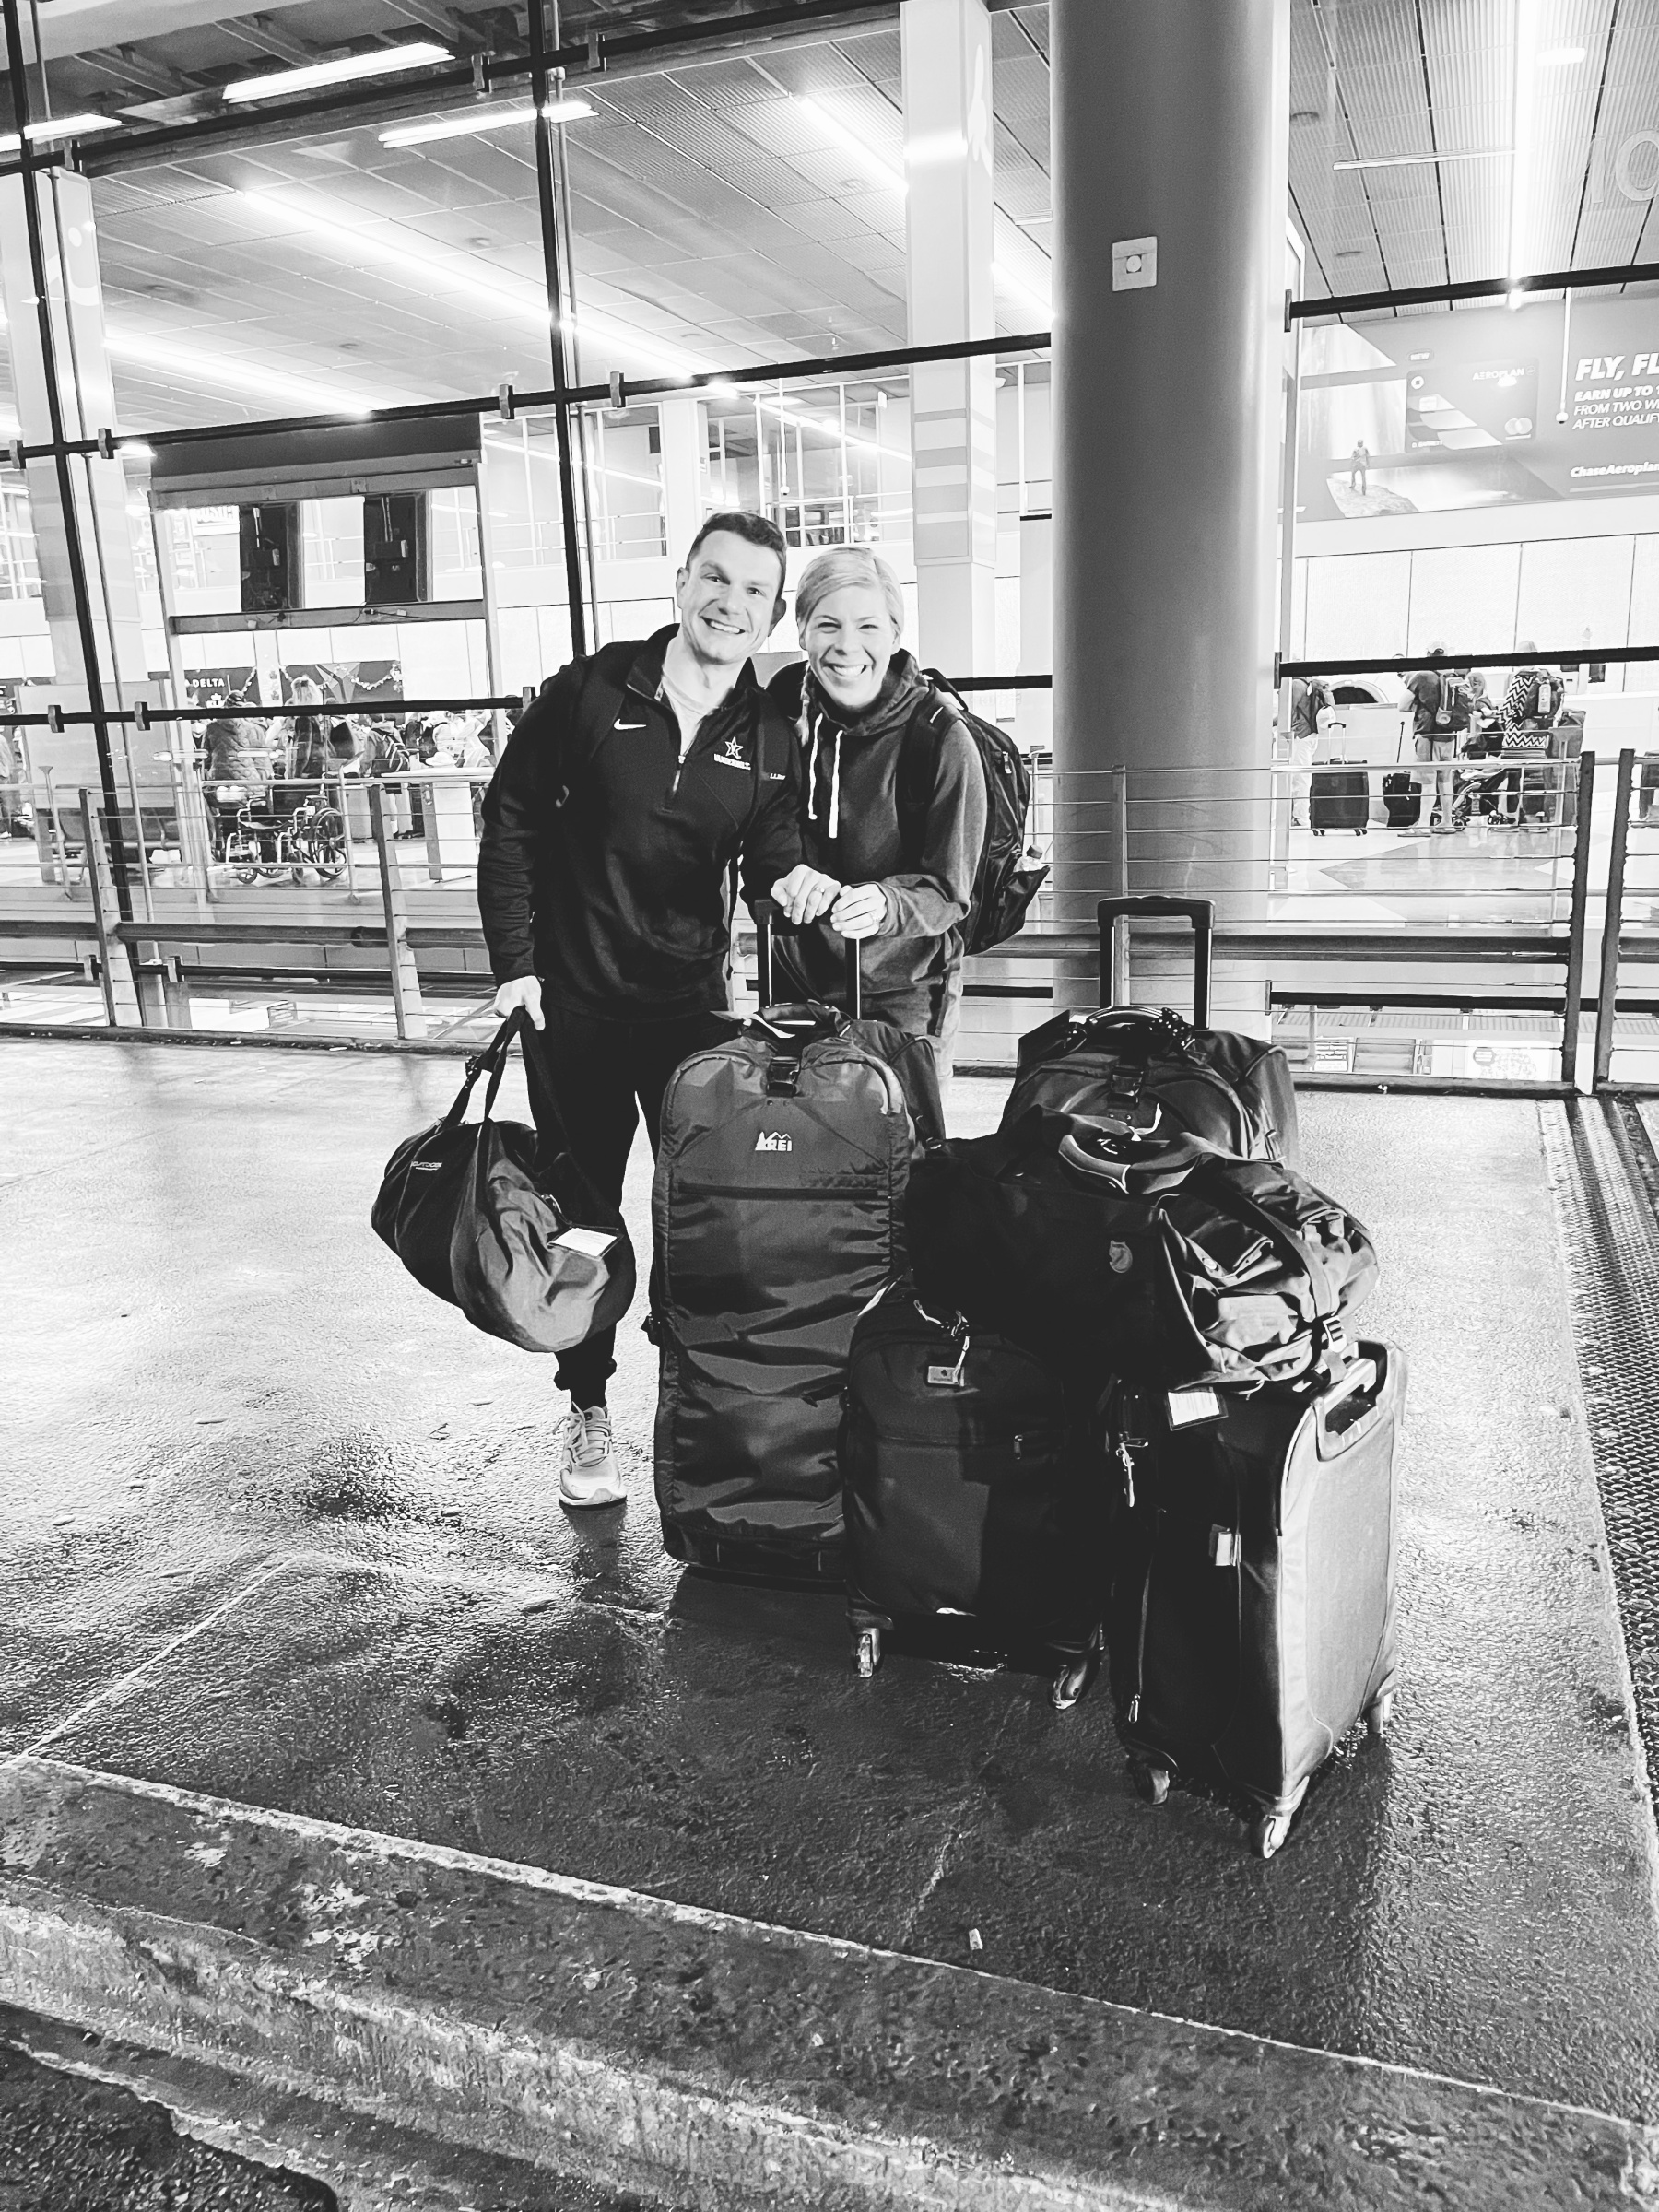 hilari and grant with luggage at ohare airport